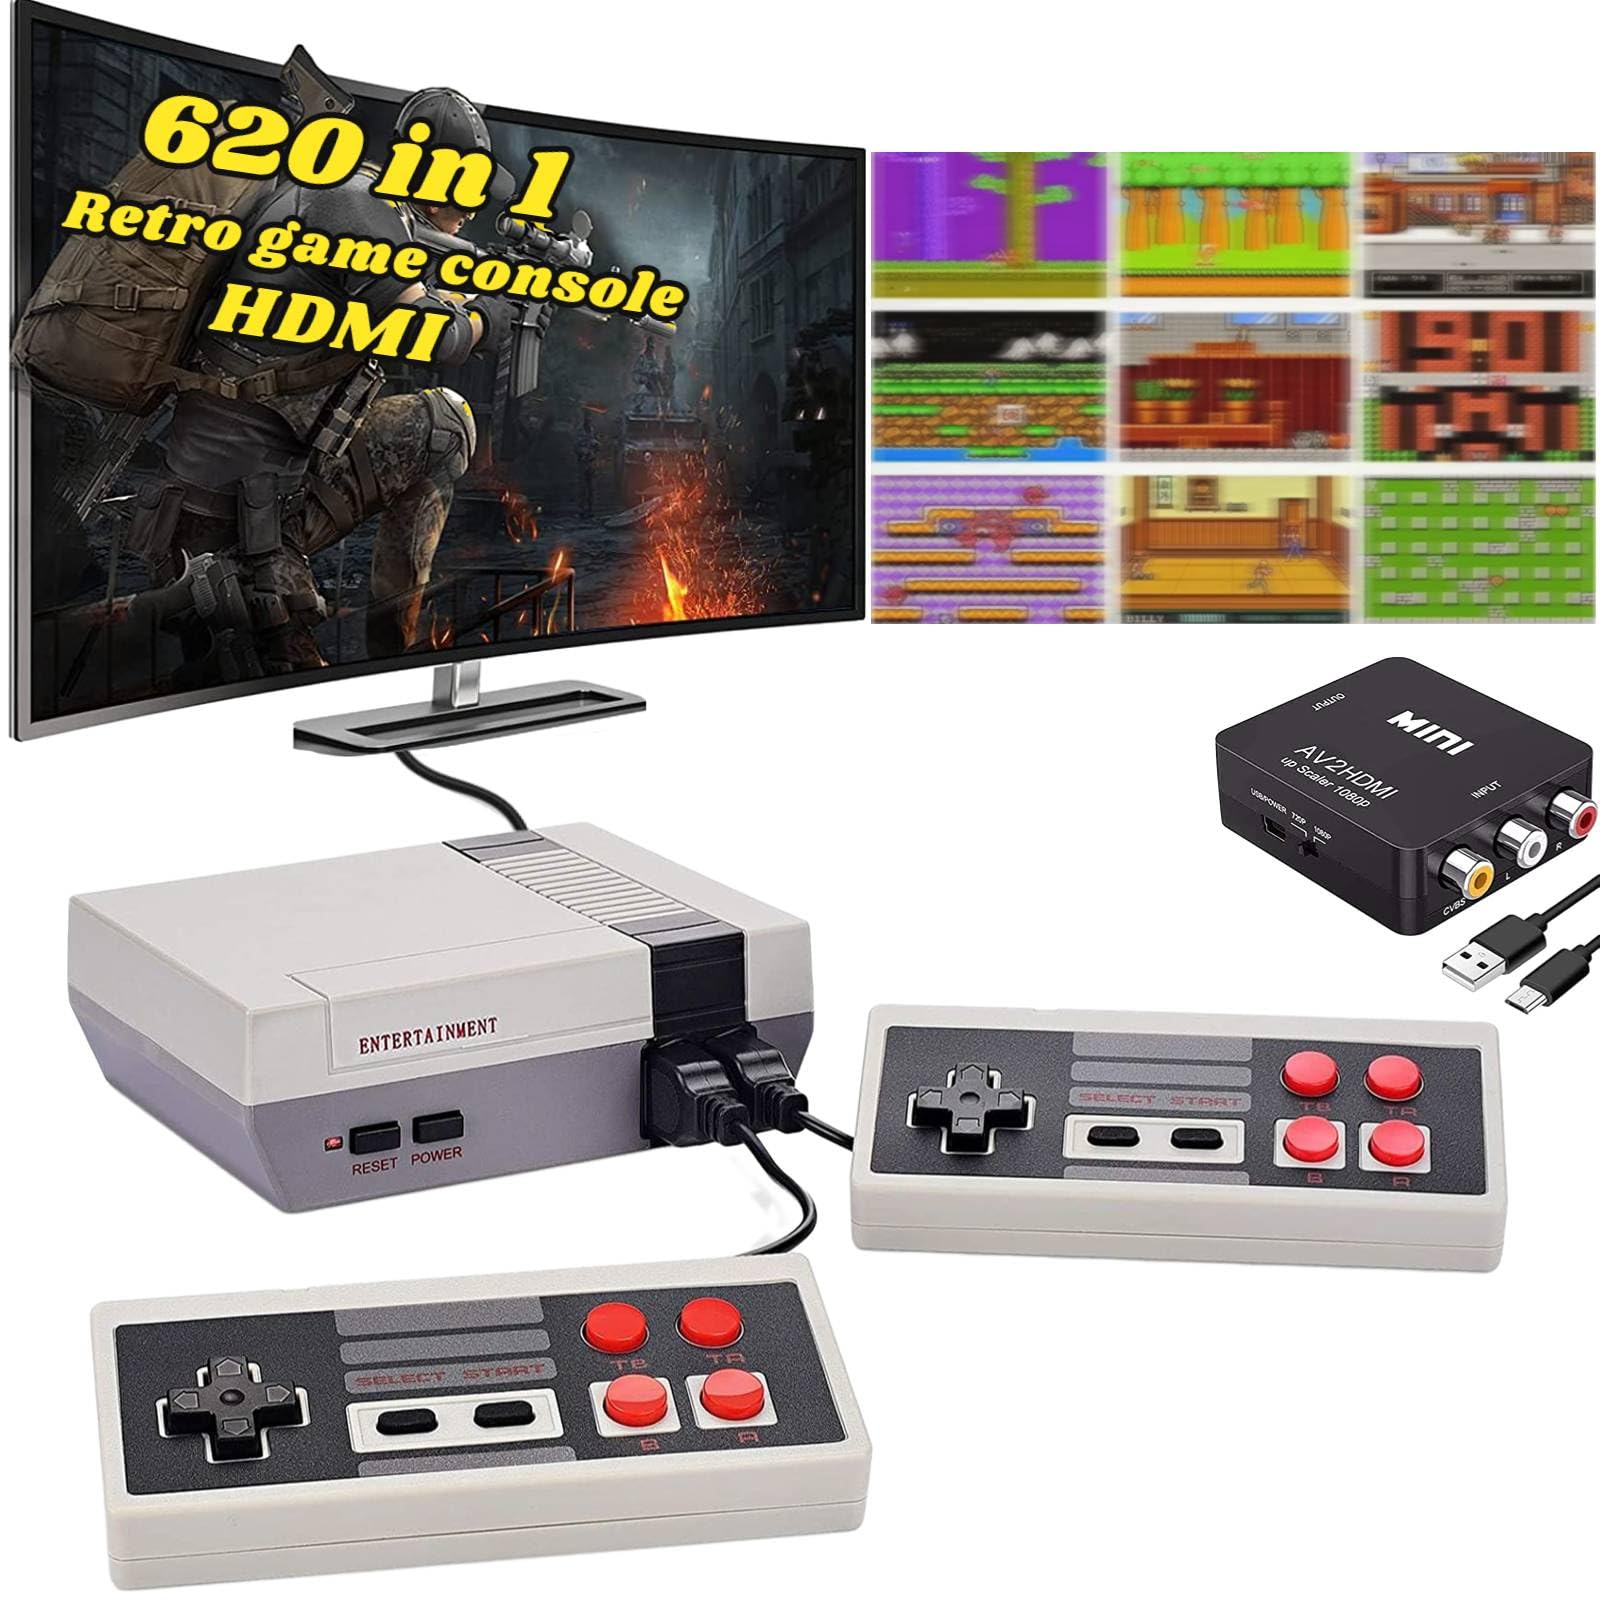 Retro Classic Game Console,Classic Video Games System Built-in 620 Games and 2 Classic Edition Controllers,Av and HDMI Output Plug and Play,Retro Toys